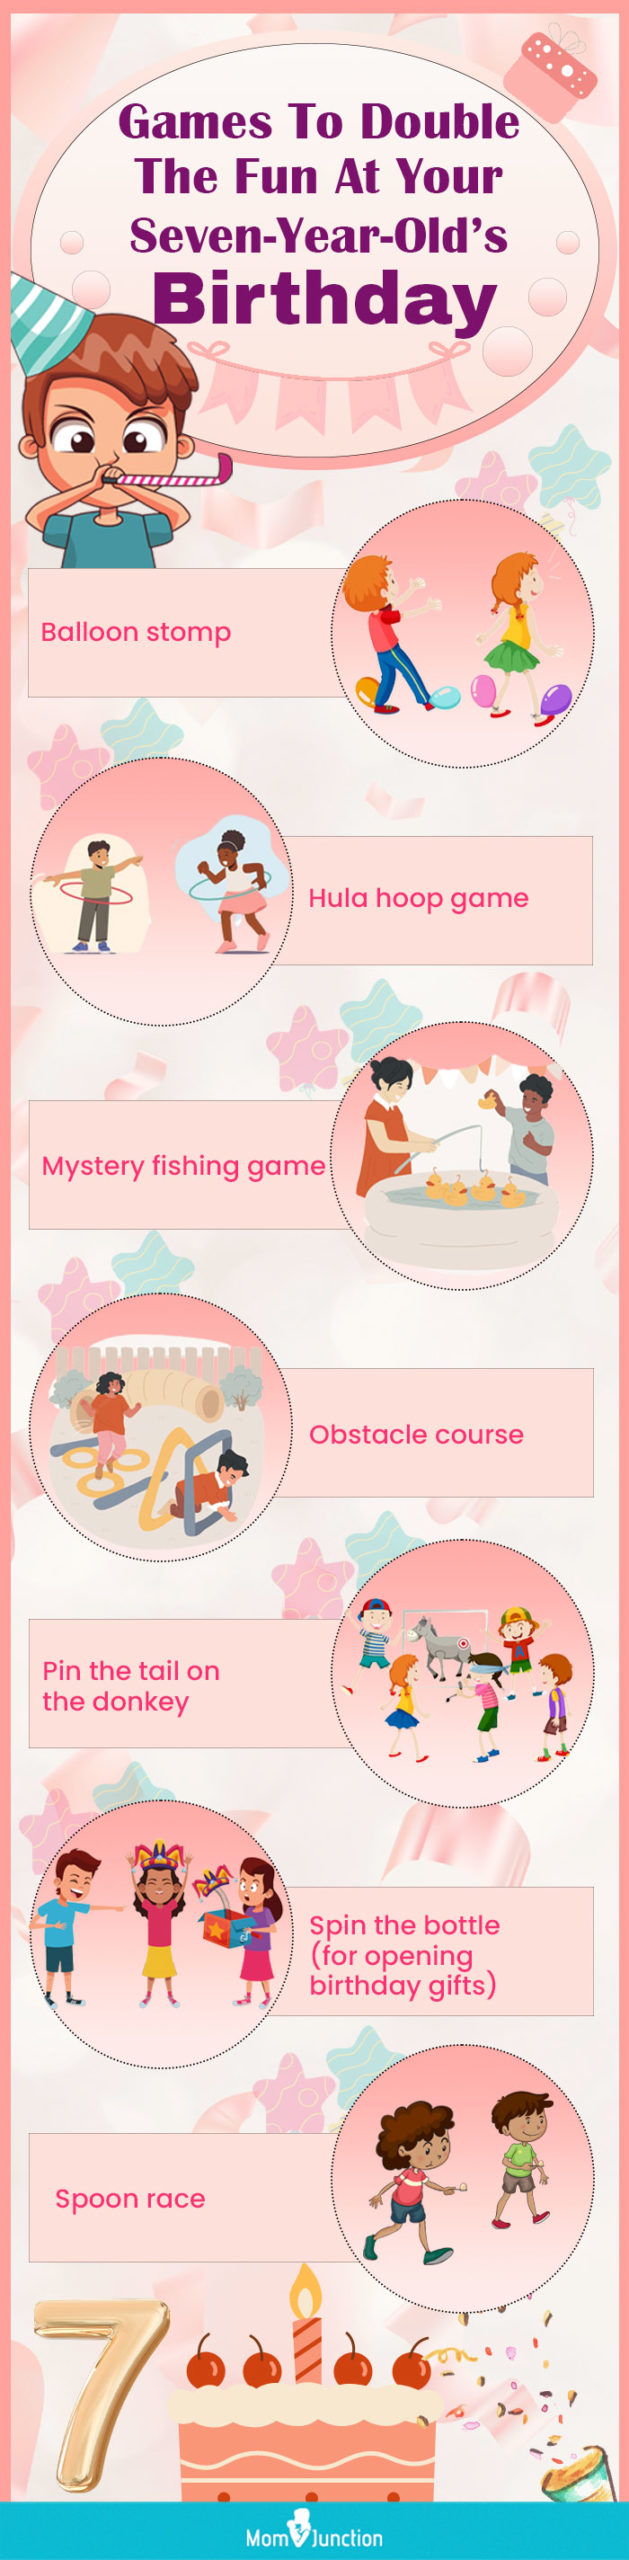 seven-year-old birthday party games (infographic)